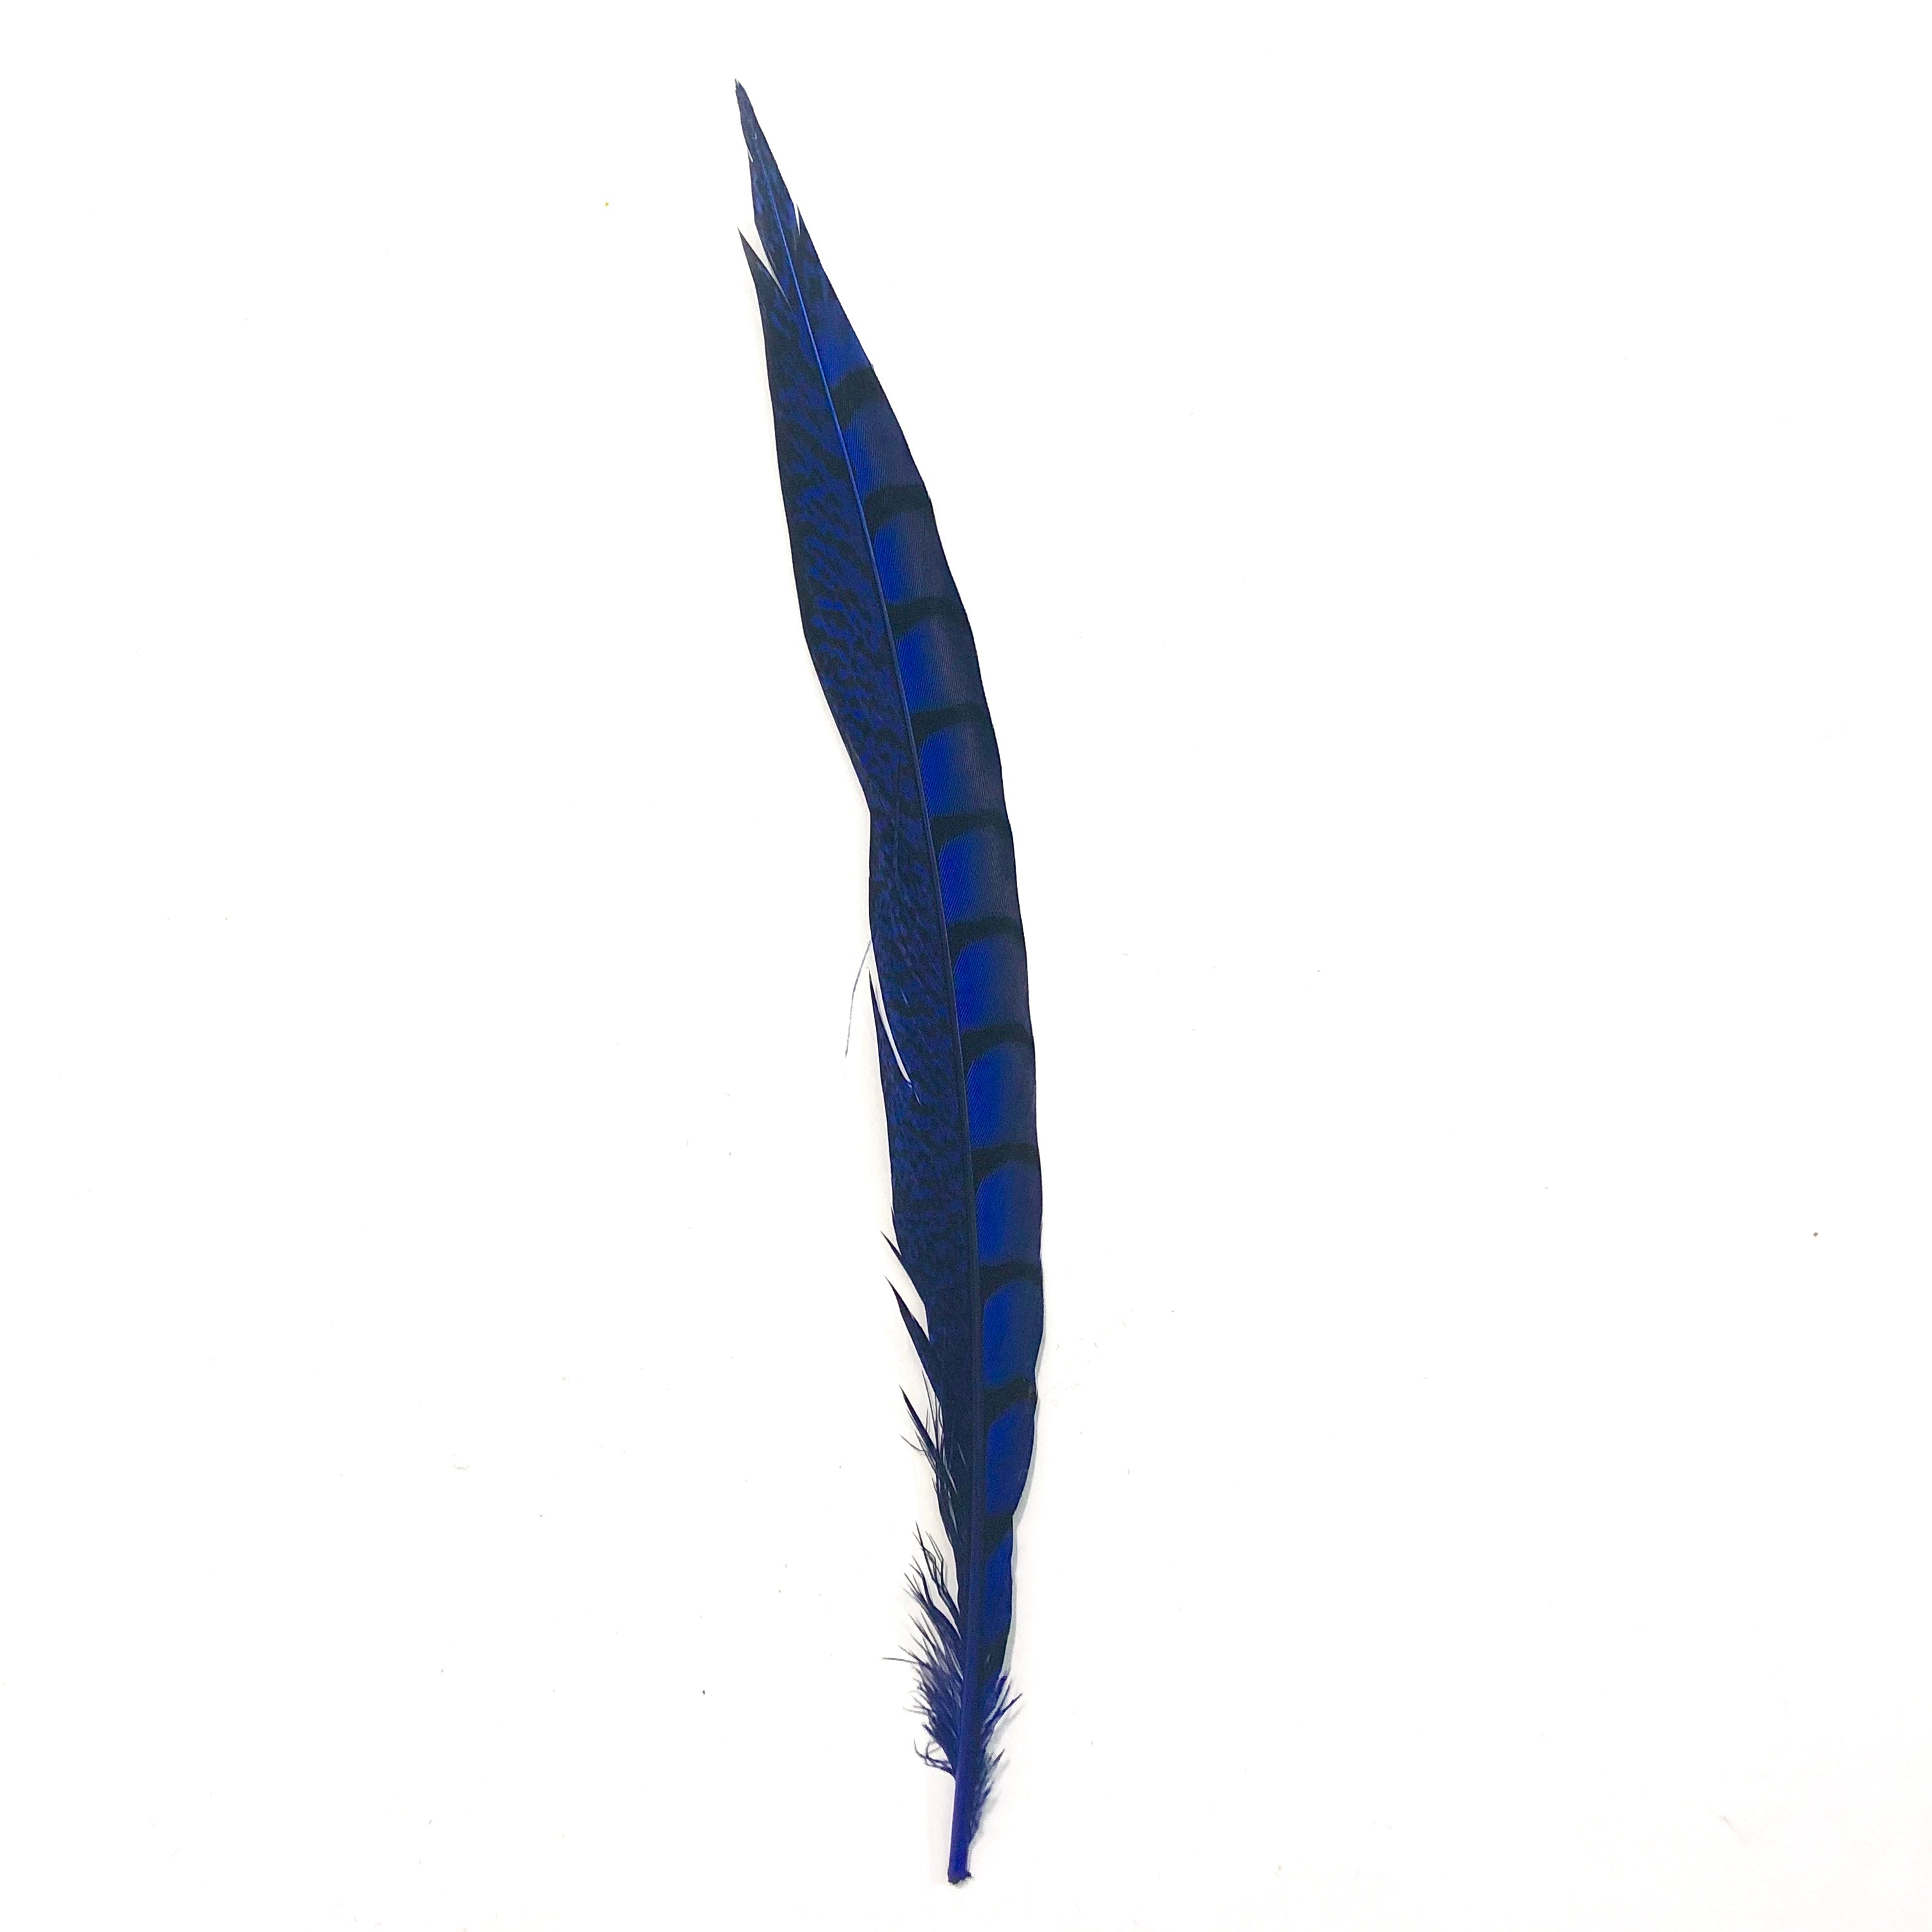 5" to 10" Lady Amherst Pheasant Side Tail Feather x 10 pcs - Royal